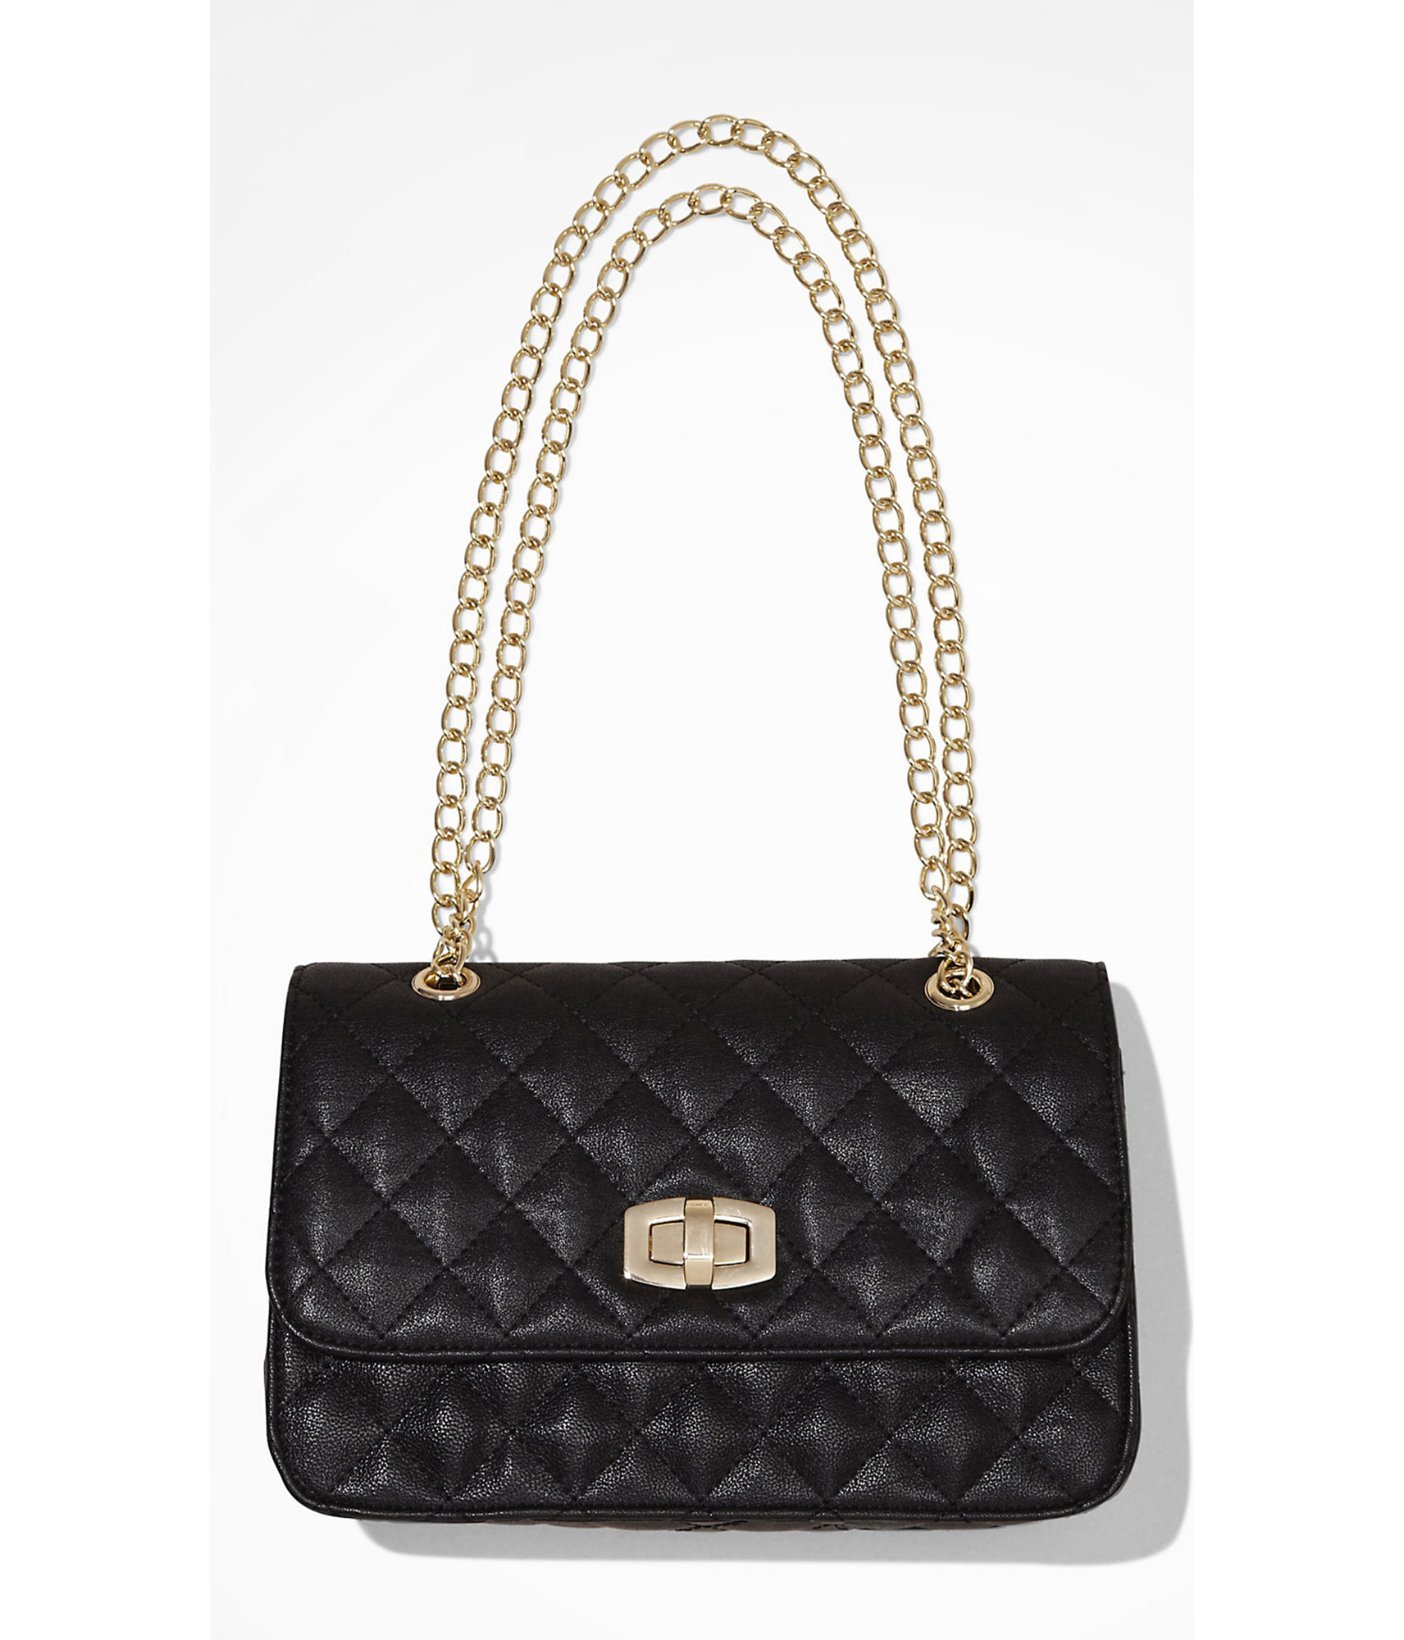 Lyst - Express Quilted Chain Strap Shoulder Bag in Black